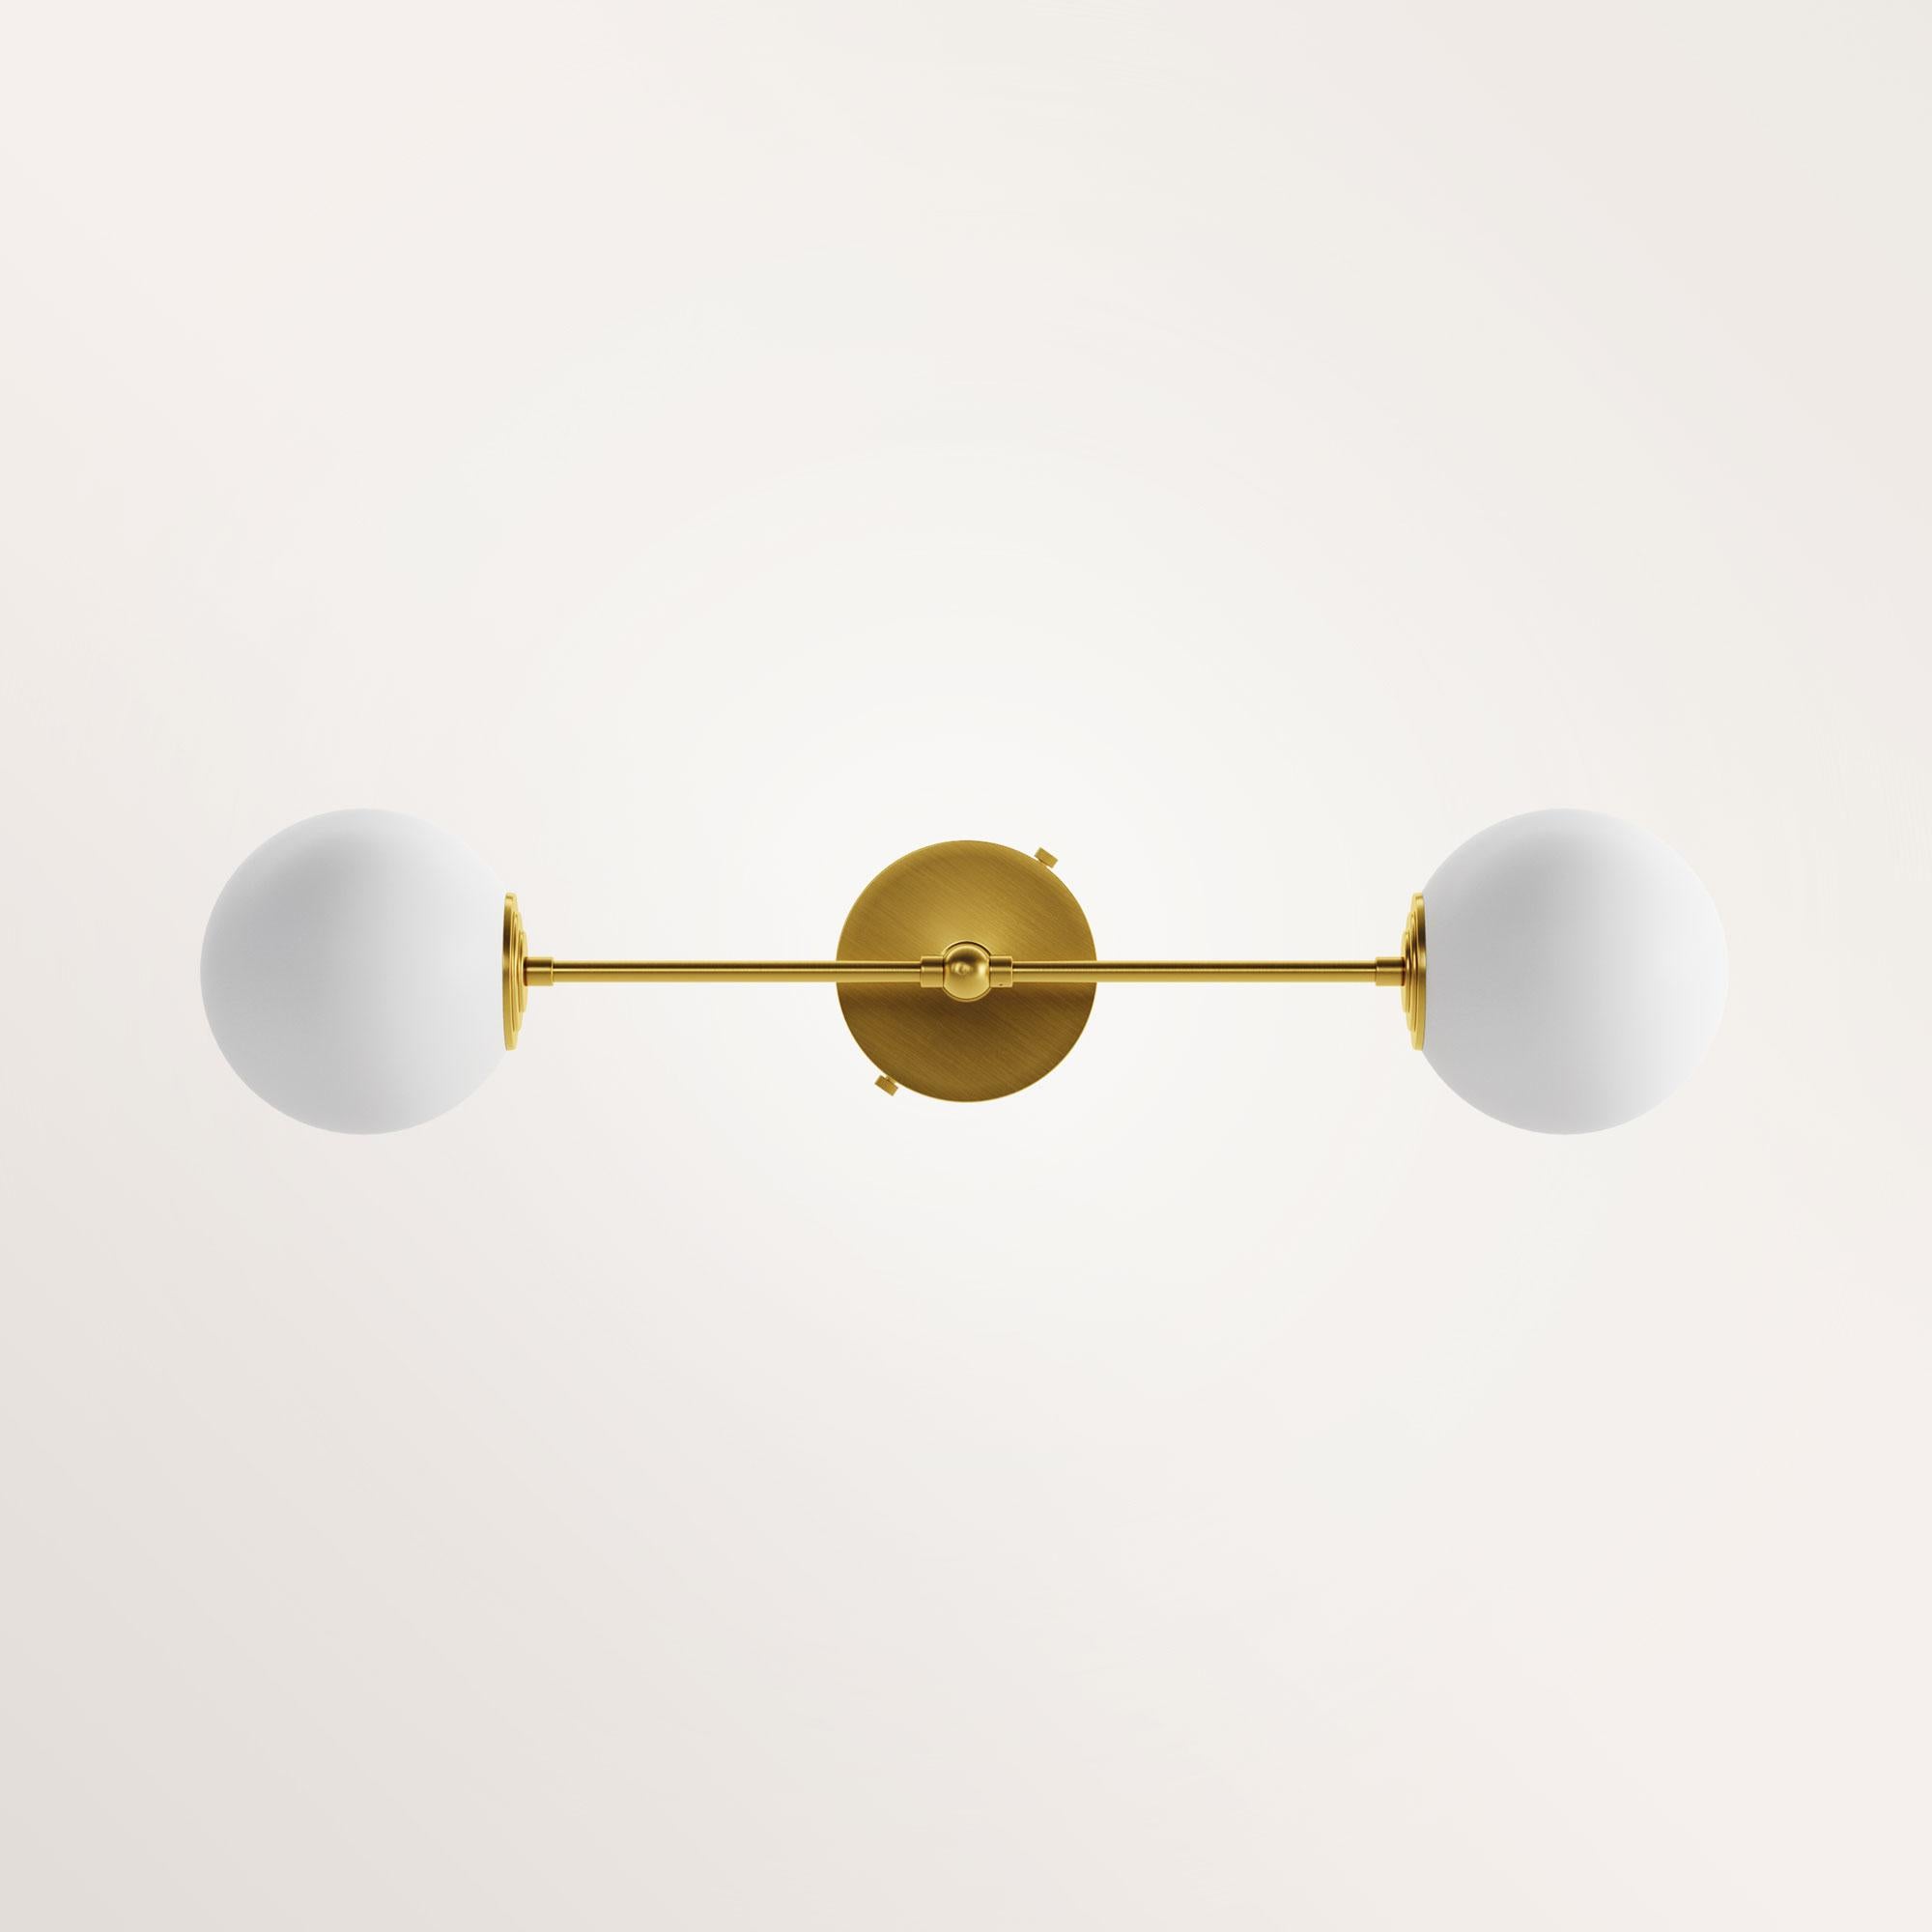 Handmade Medium Janus wall lamp by Gobo Lights
Dimensions: 55 L X 12 l X 15 H
Materials: Brass, Opaline

Goddess with three light heads 

Self-taught and from the world of chemistry, this Belgian craftsman / designer designs his pieces with as